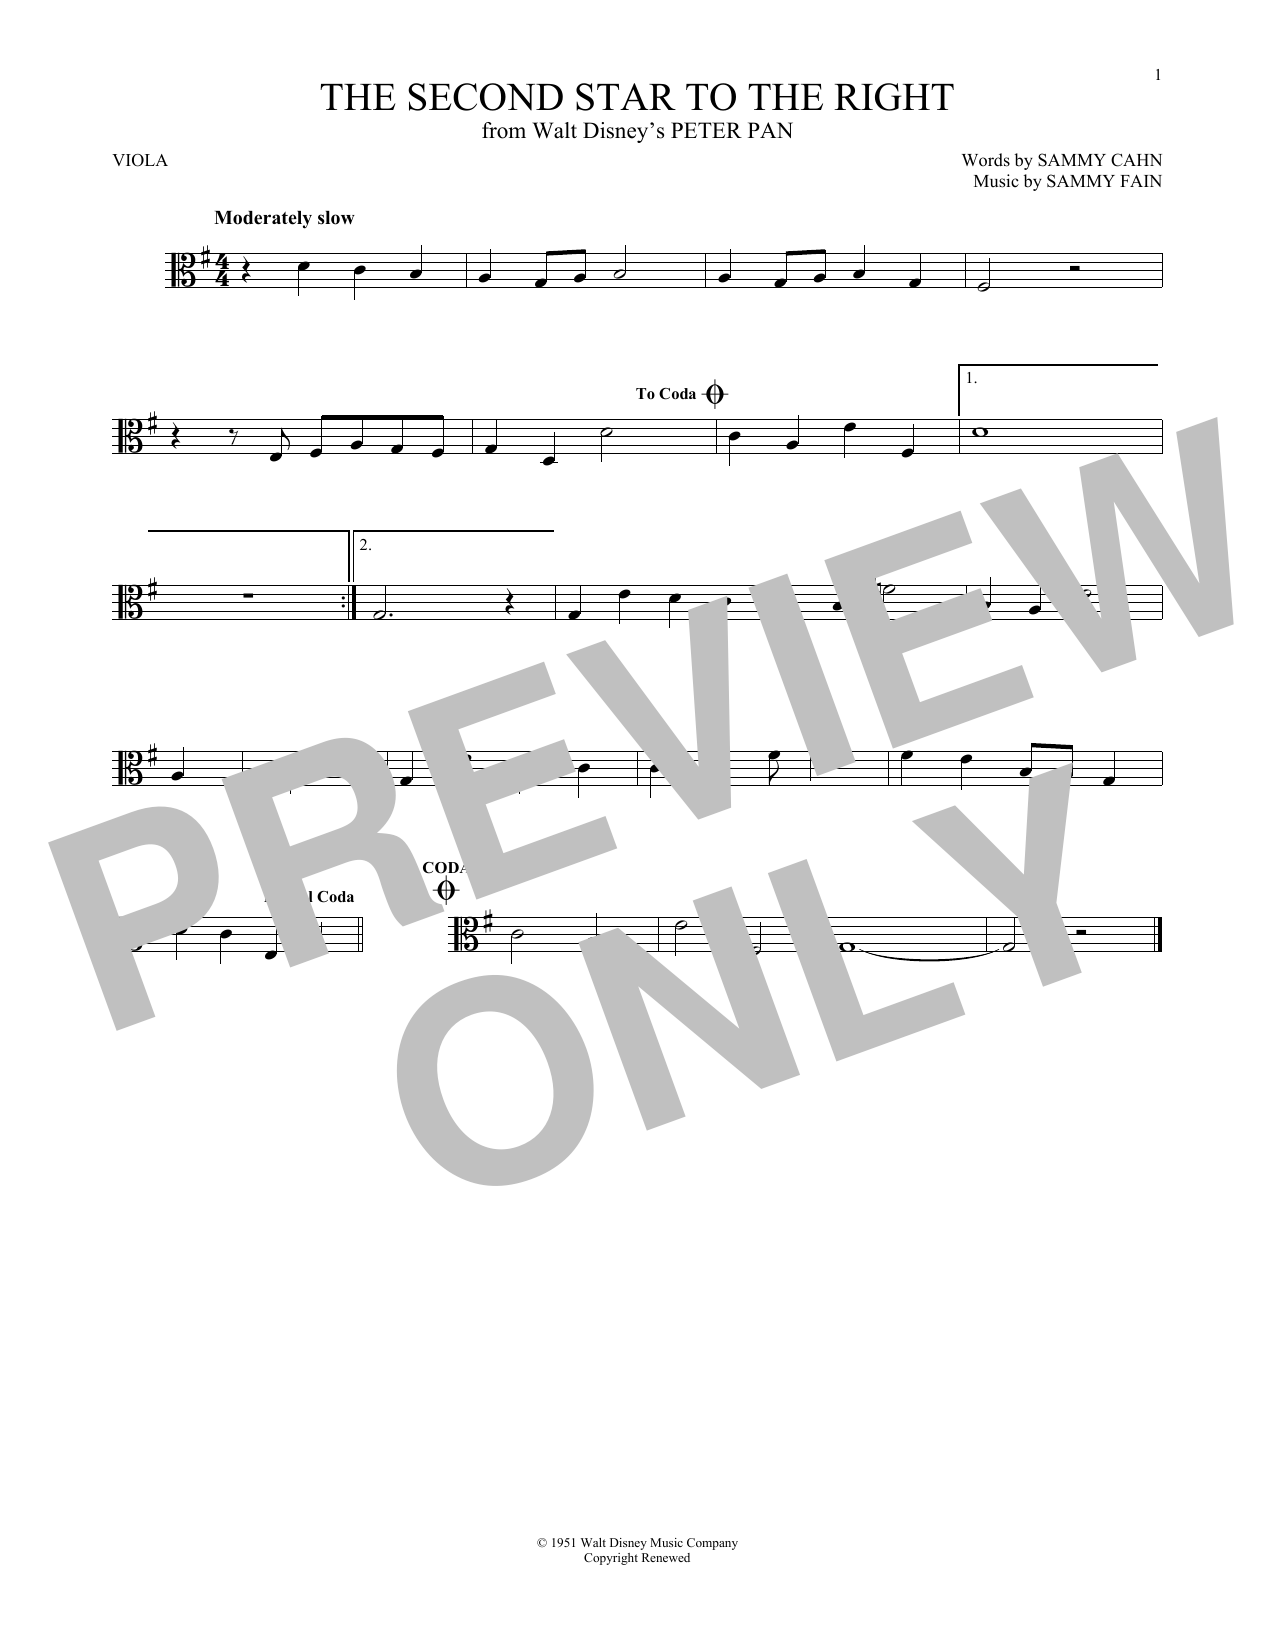 Download Sammy Cahn The Second Star To The Right Sheet Music